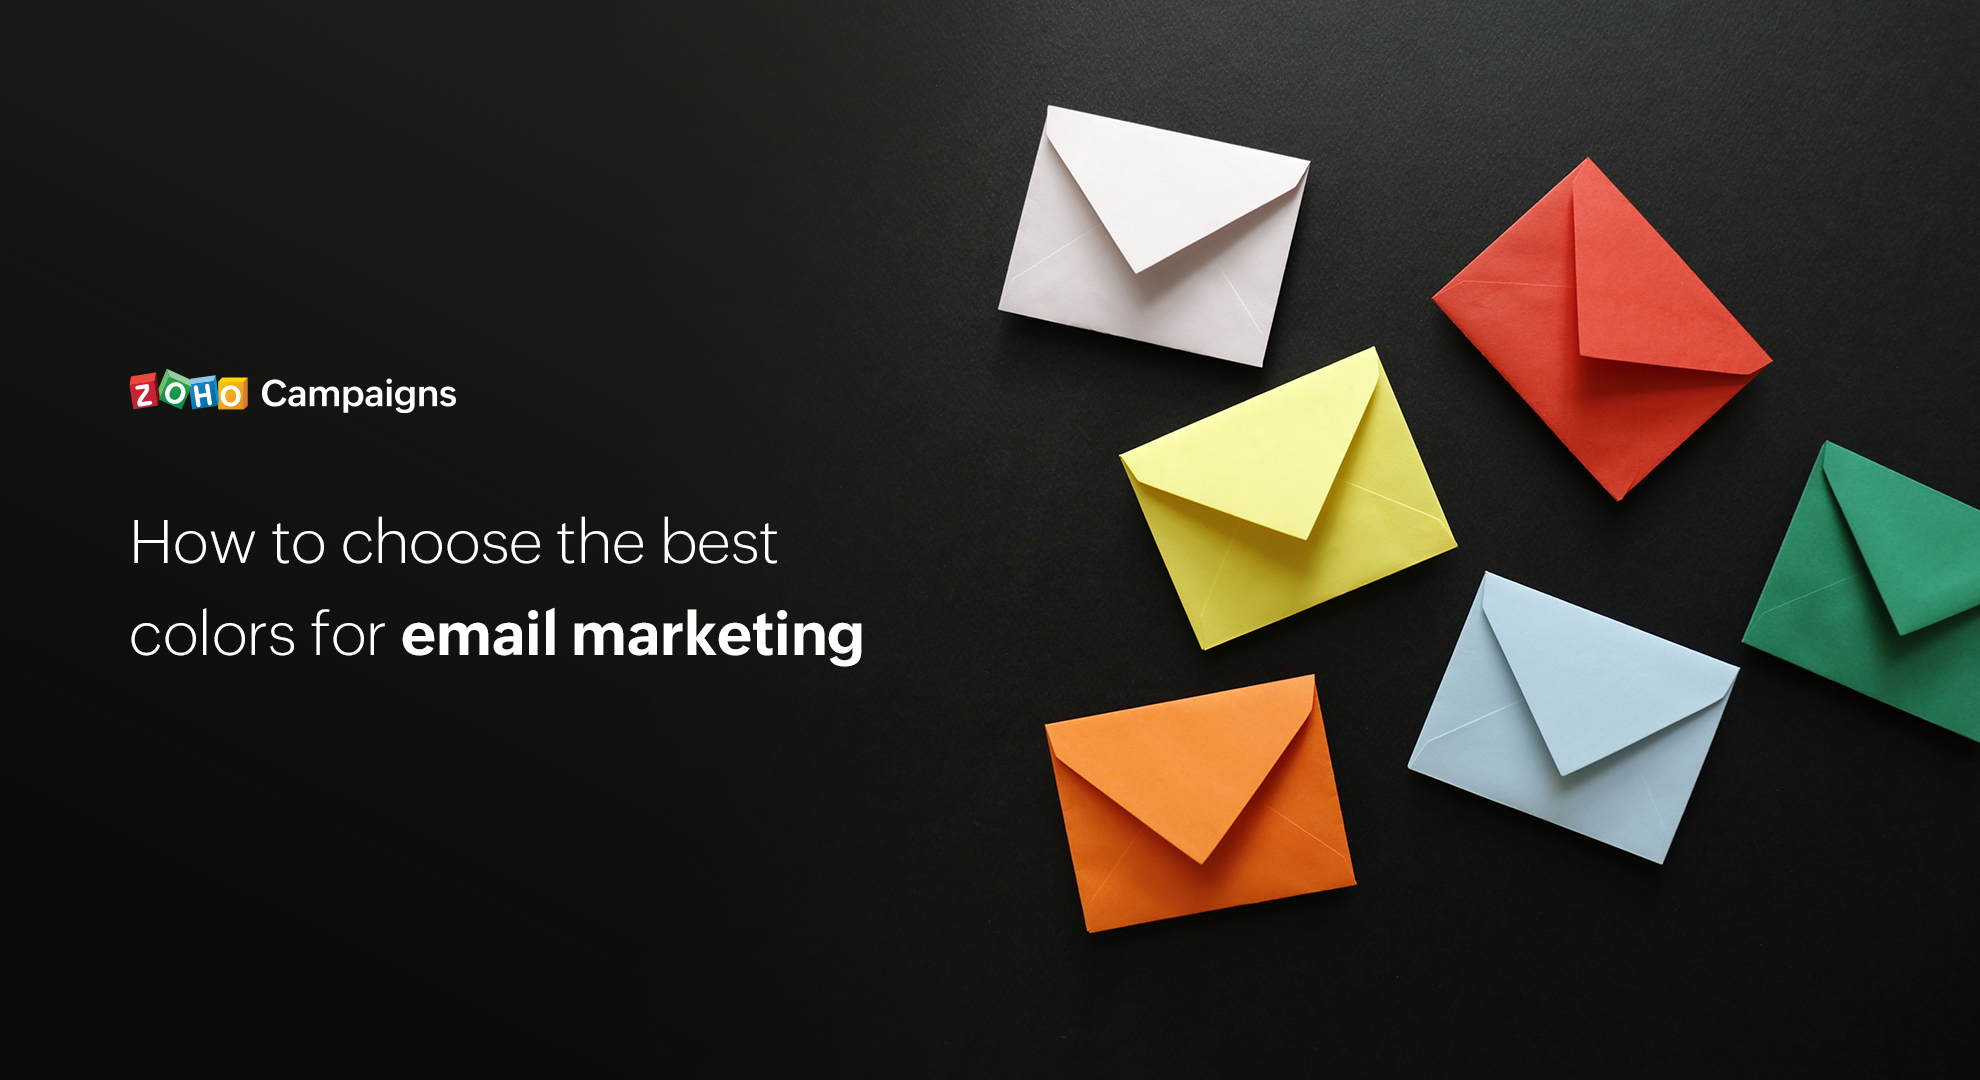 How to choose the best colors for email marketing